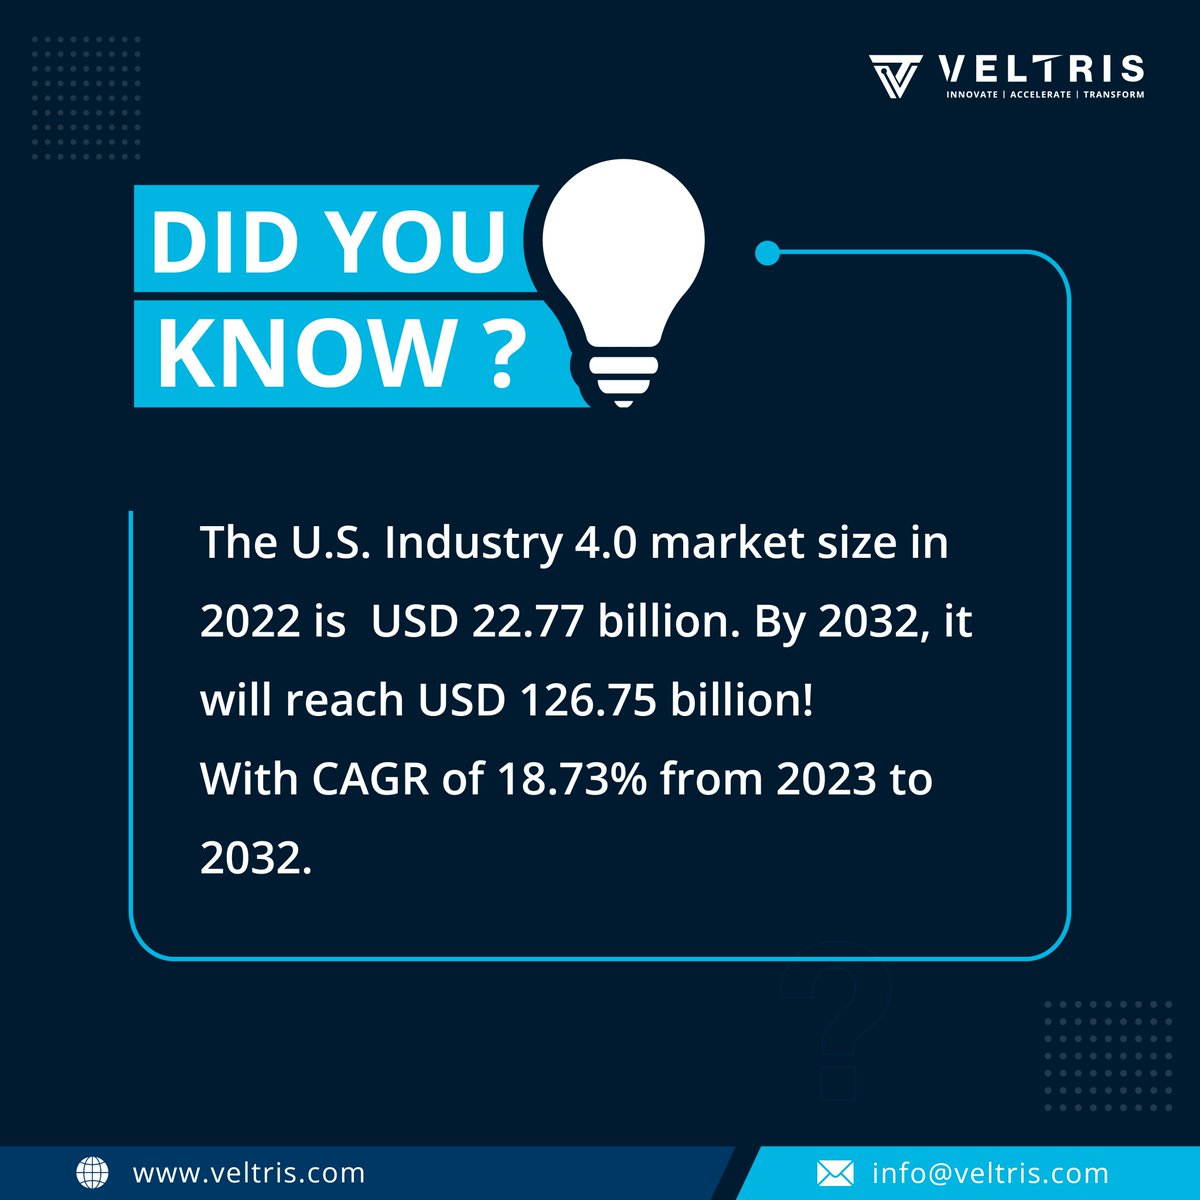 With its innovative solutions that shape the future, we stands tall in the #Industry 4.0 era and makes everything possible. Explore how Veltris is preparing industries to face tomorrow's challenges.
Learn more tinyurl.com/mr442da4
#IndustryInsights #TechEvolution #Veltris